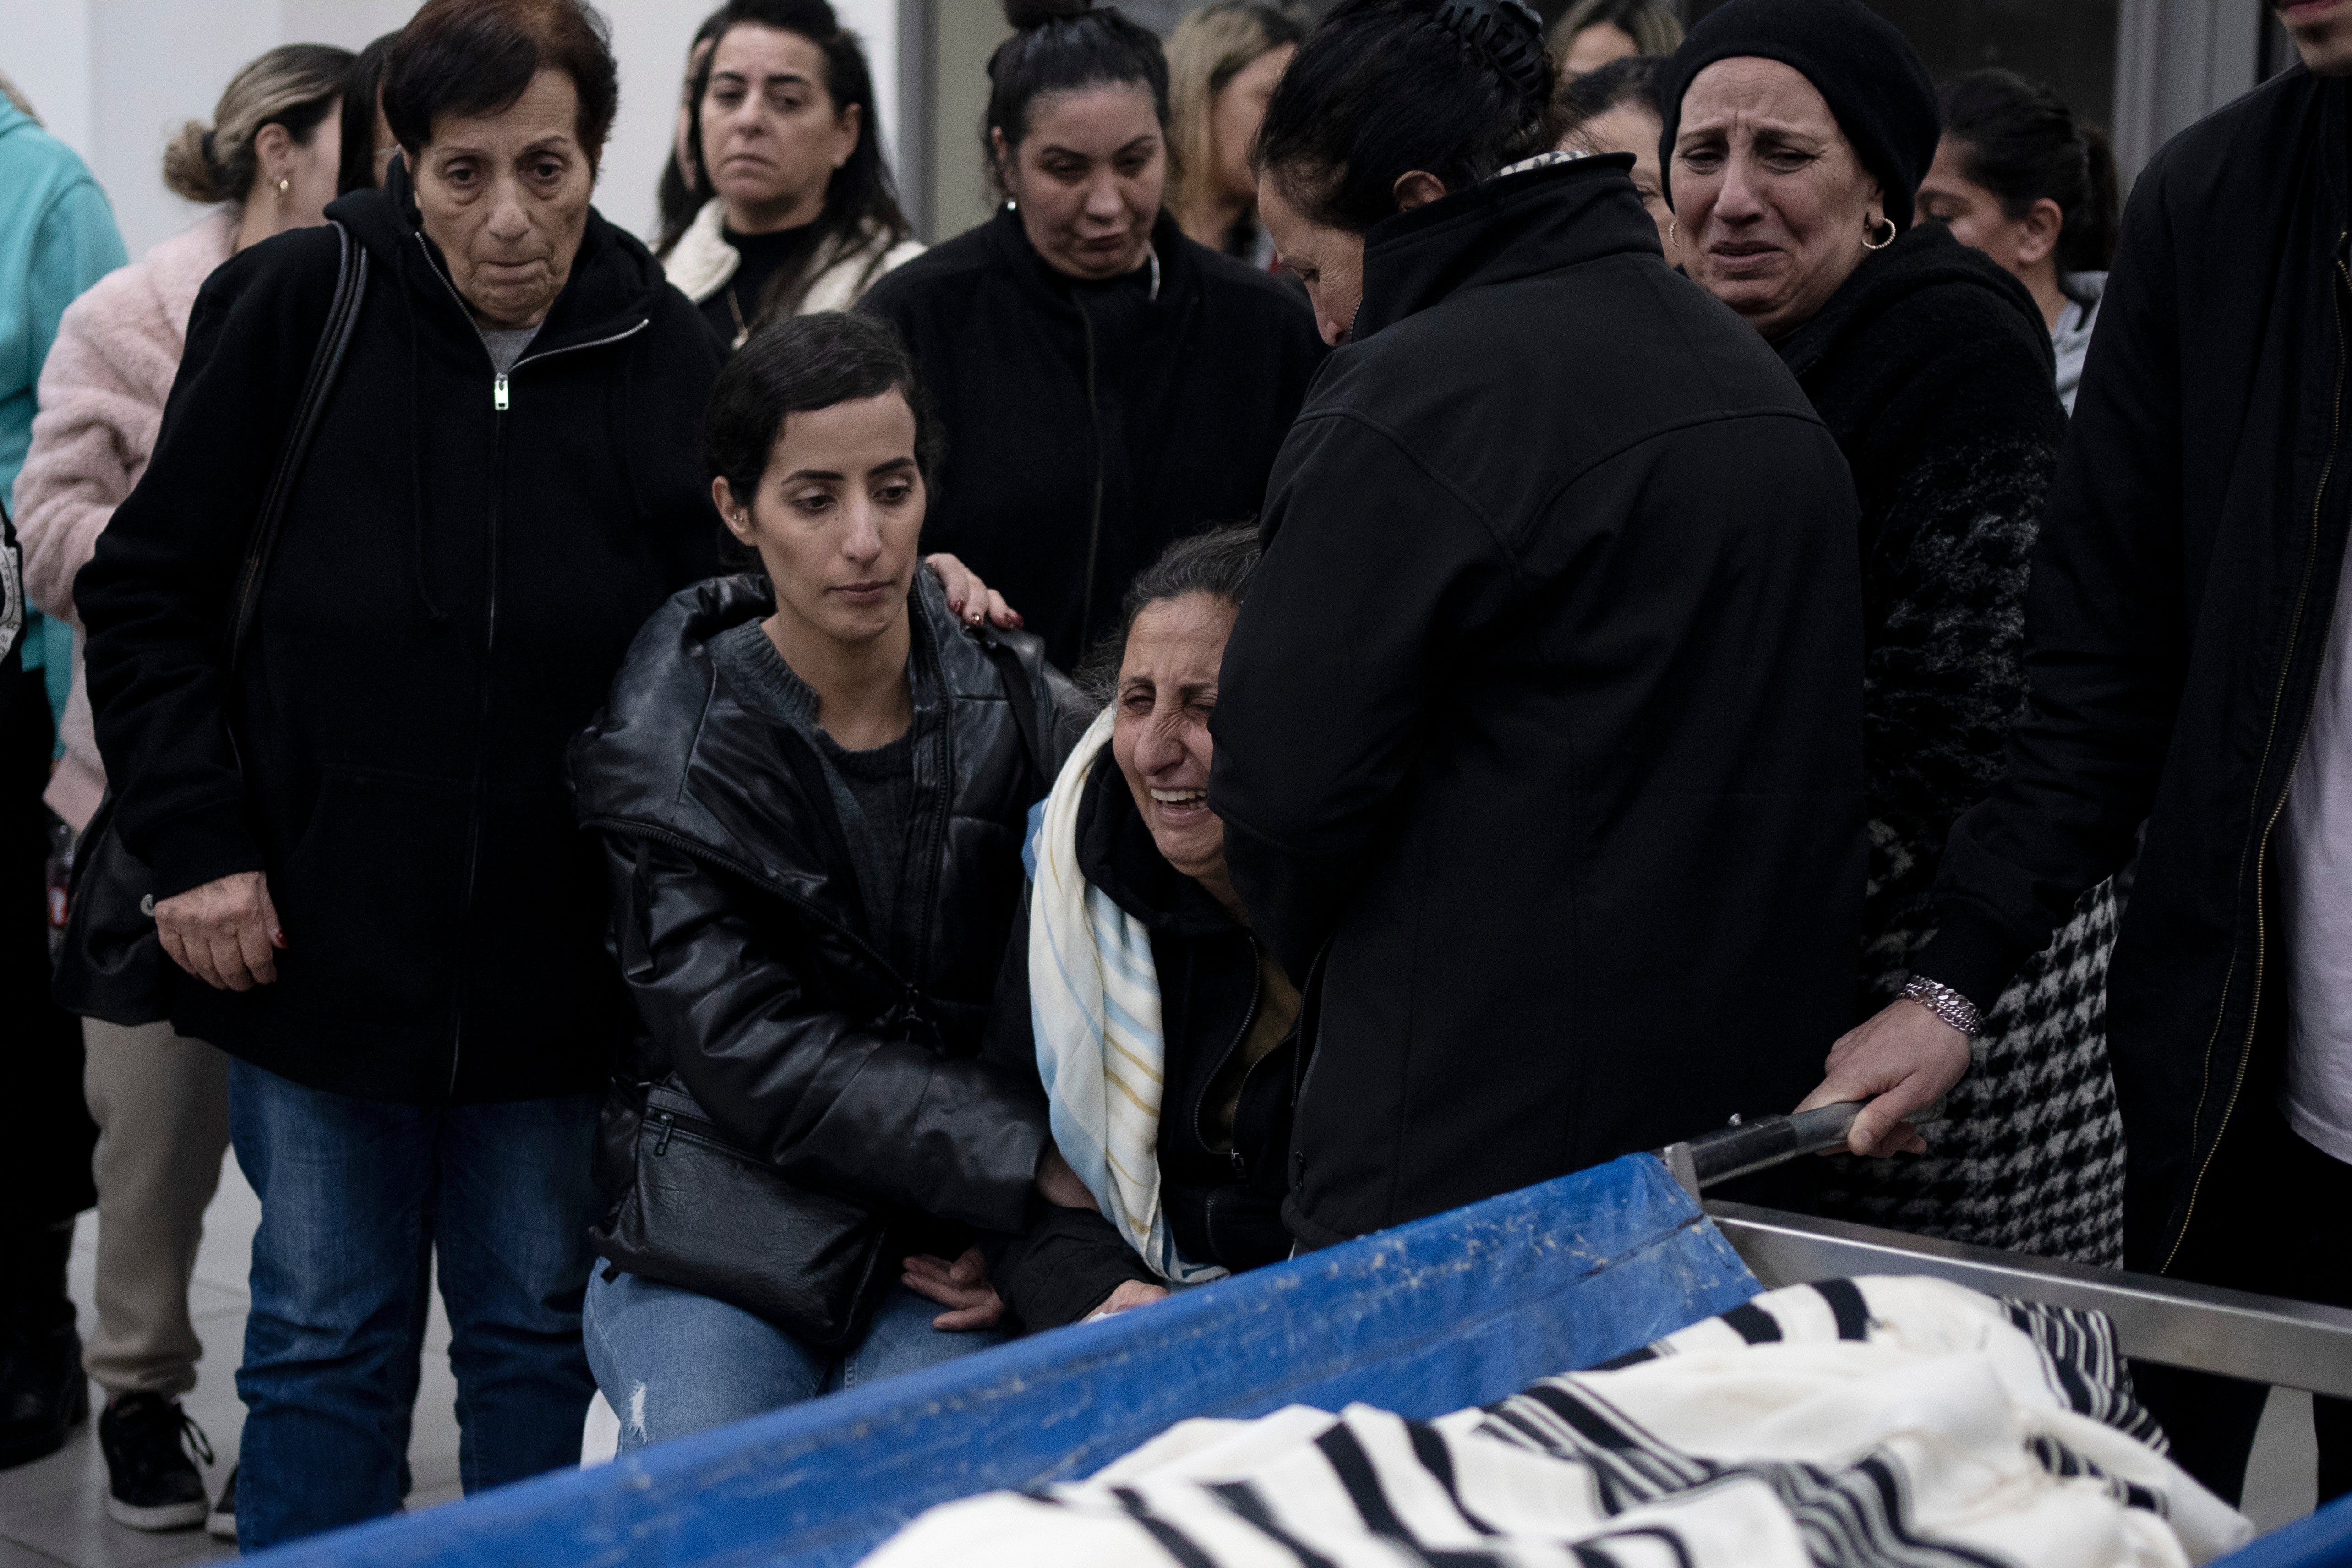 Relatives of Matan Elmaliach, 26, react during his funeral in the West Bank settlement of Maale Adumim